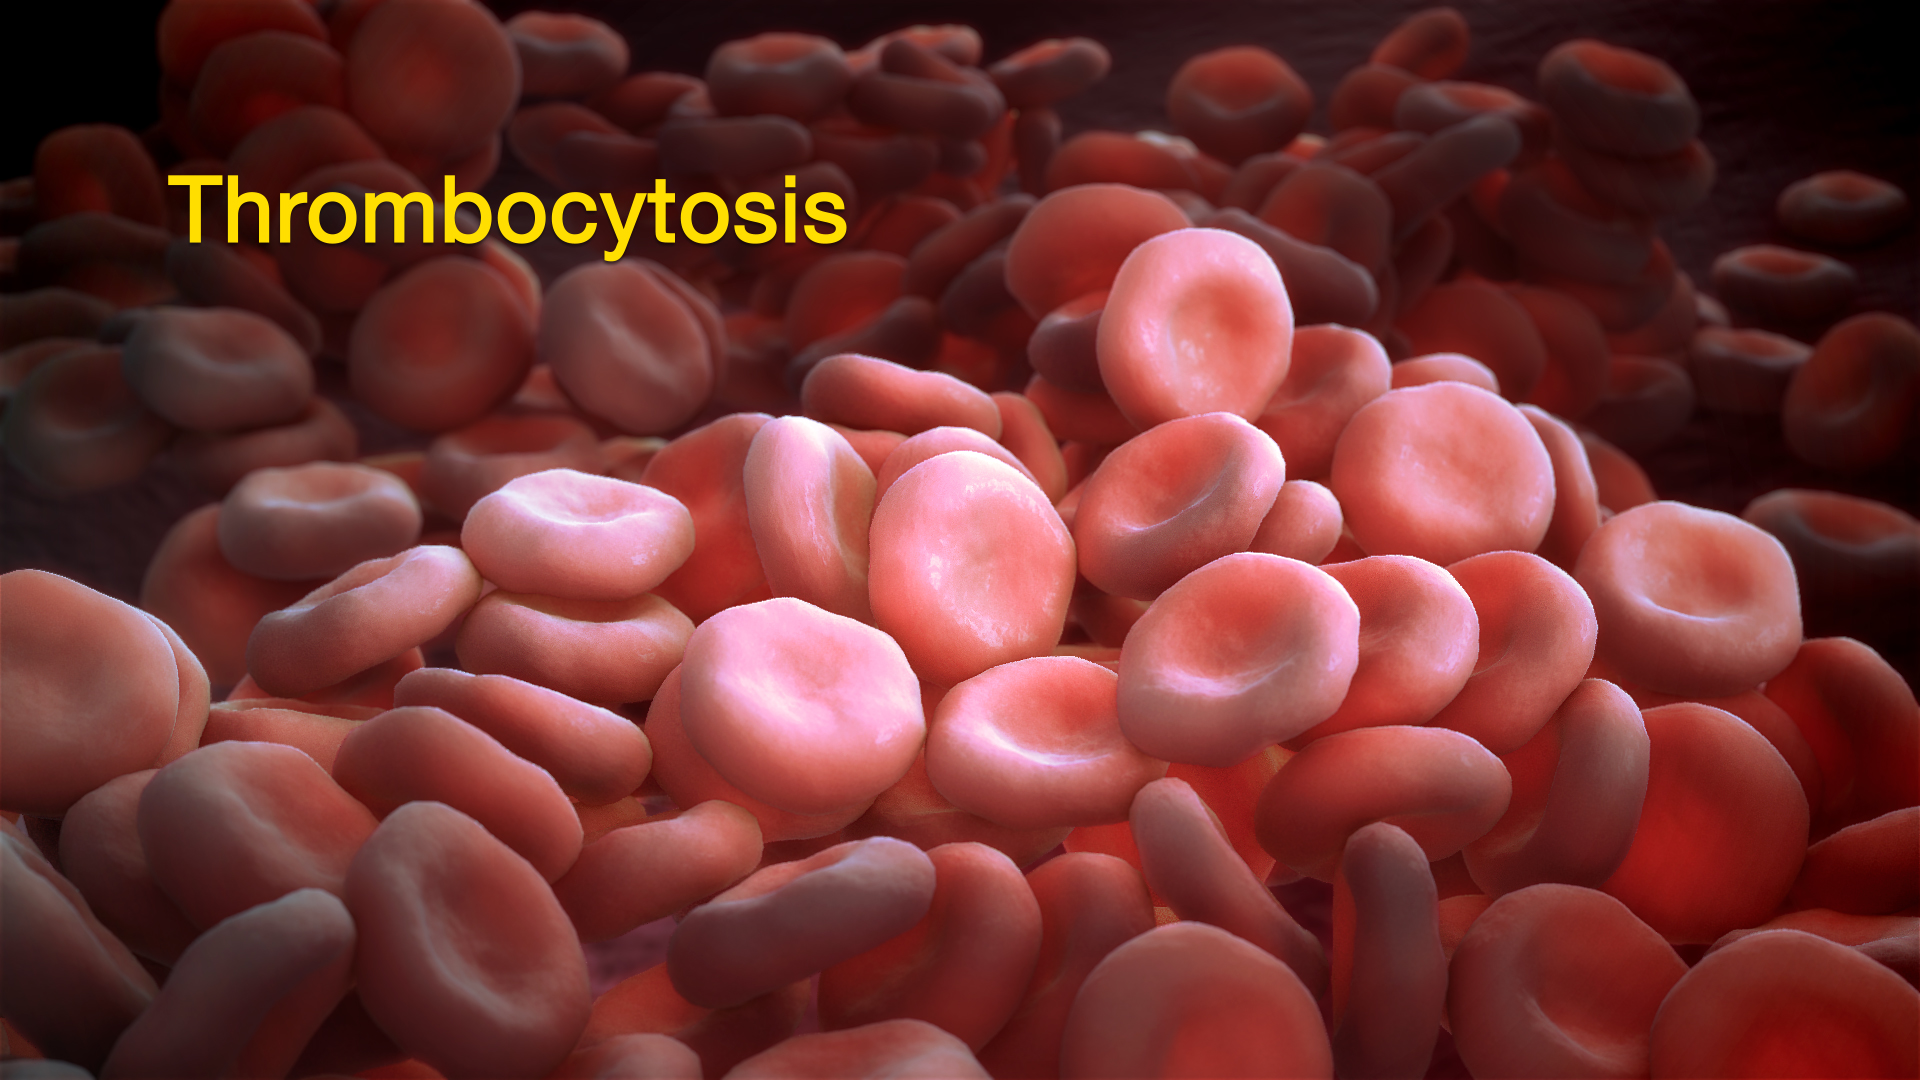 Thrombocytosis, as visualised by a 3D Medical Illustration